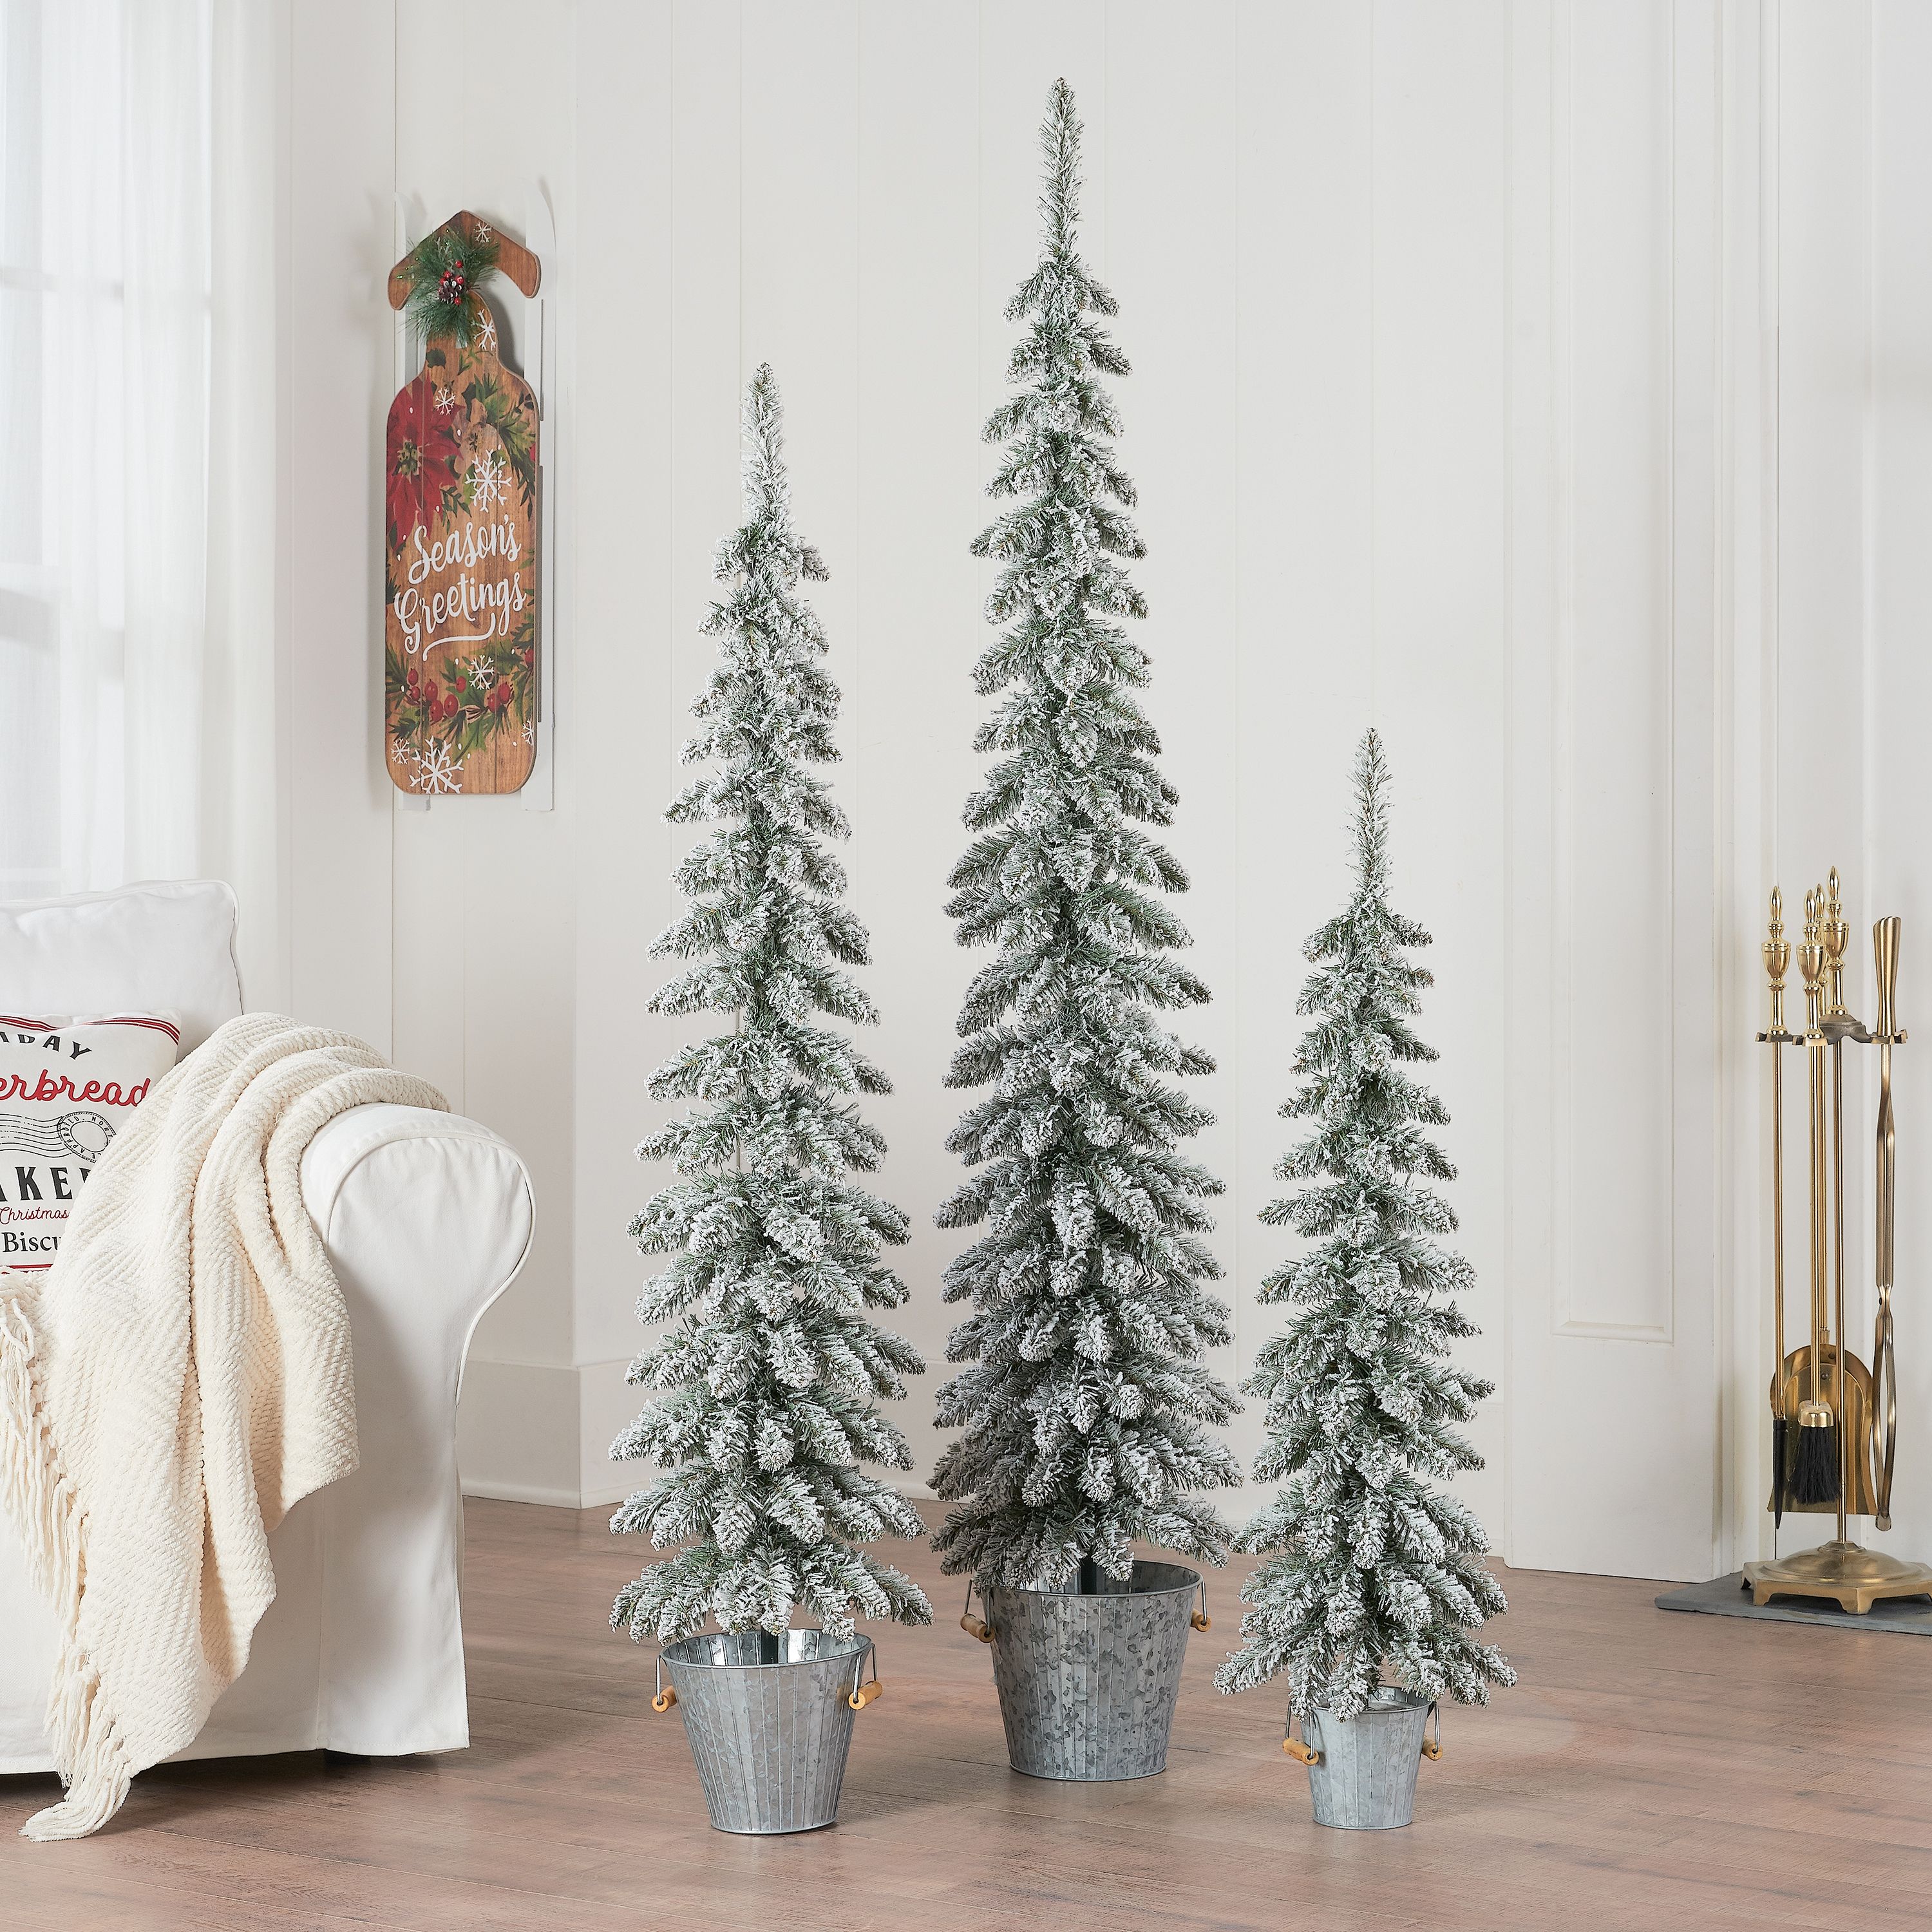 Holiday Time Flocked Pine Tree with Galvanized Pot, Set of 3, 3ft/4ft/5ft - image 2 of 2